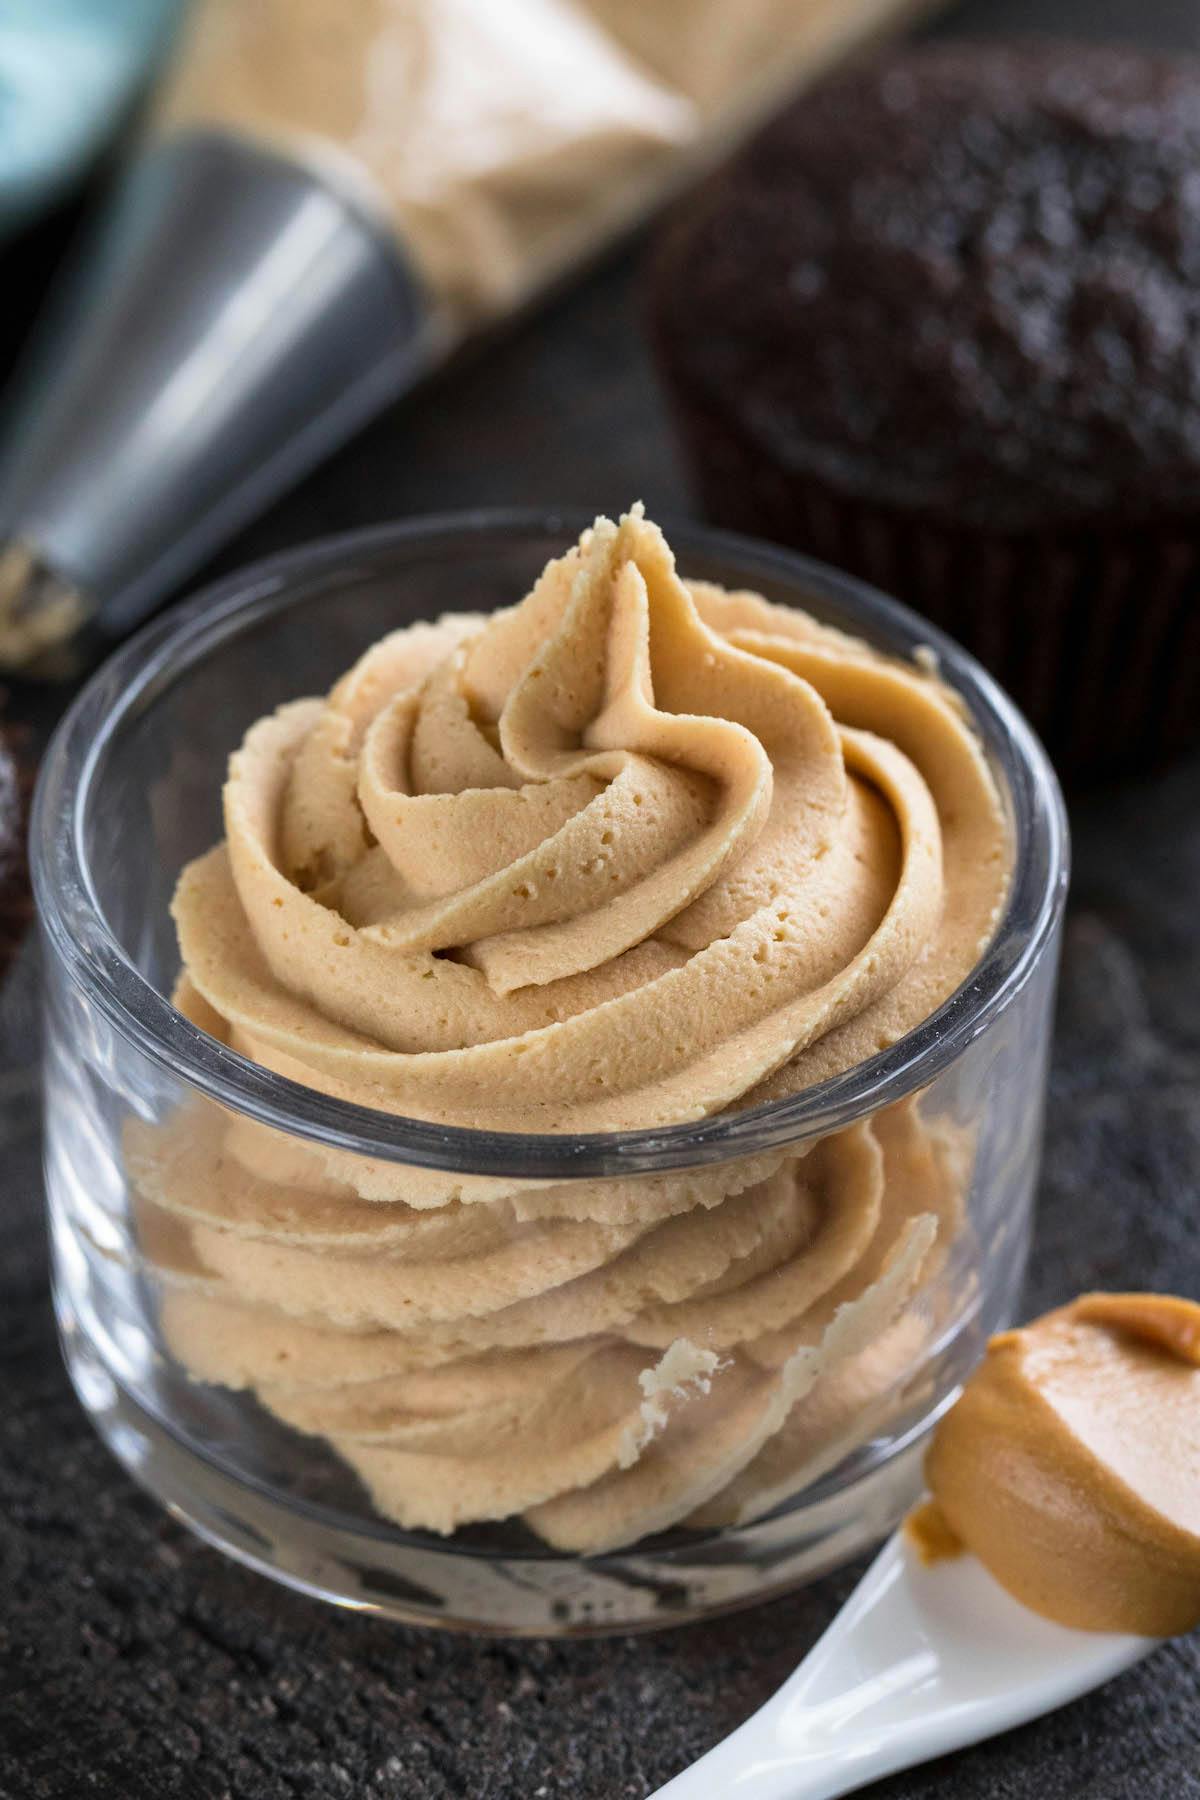 peanut butter frosting swirled in a small clear glass.